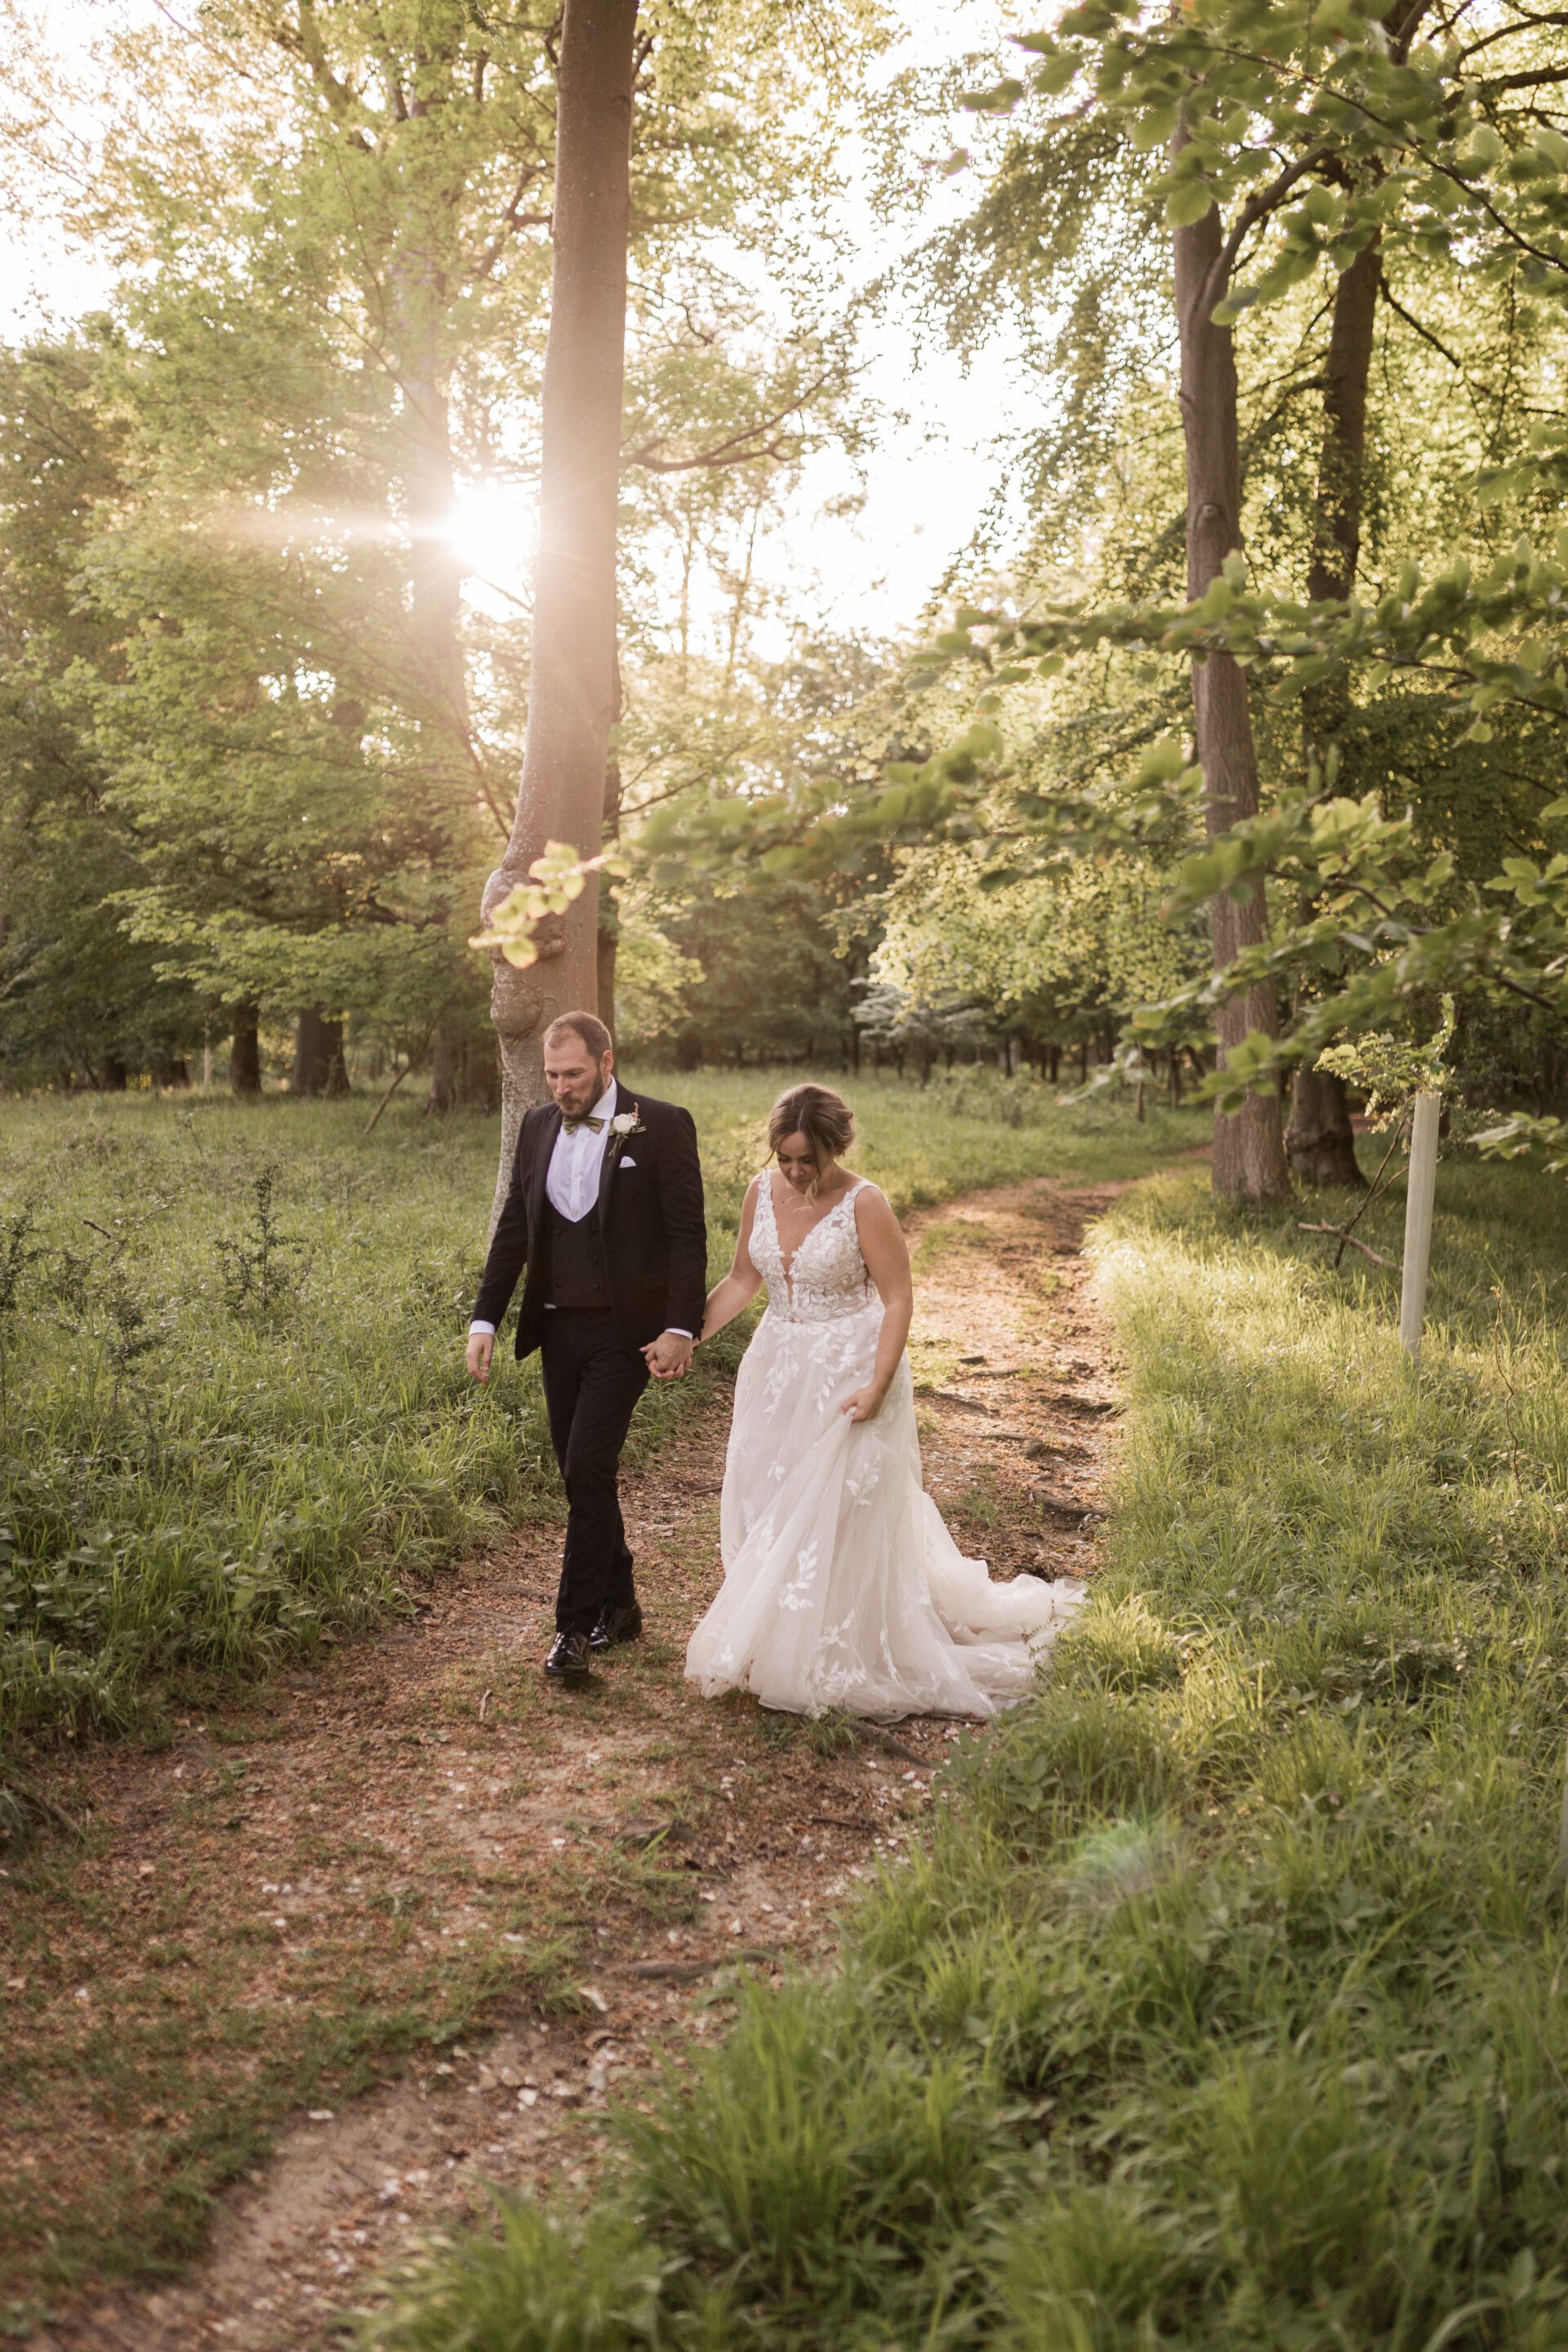 The bride and groom walk hand in hand during their golden hour couples photos